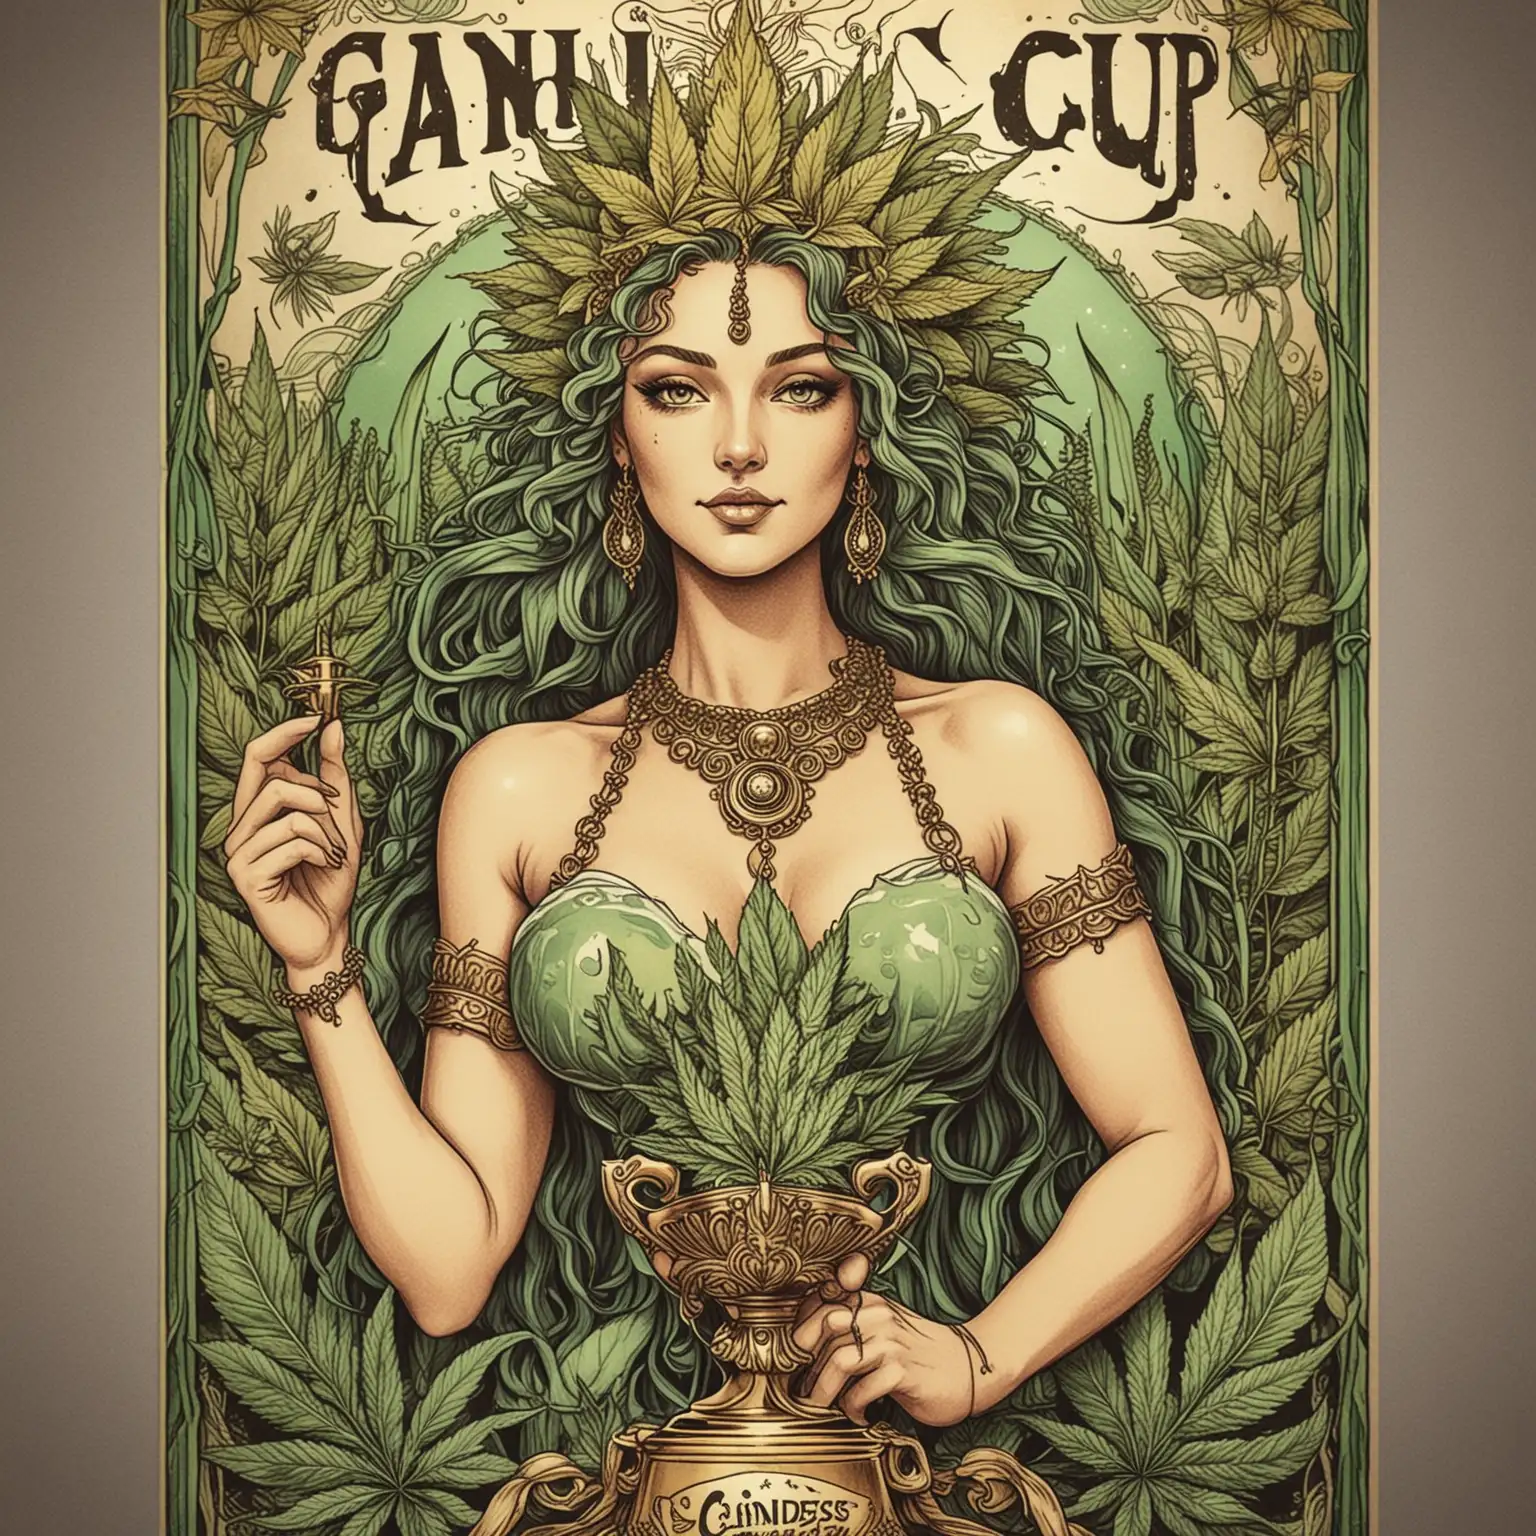 Hand Drawn Cannabis Cup Poster Trophy and Goddess